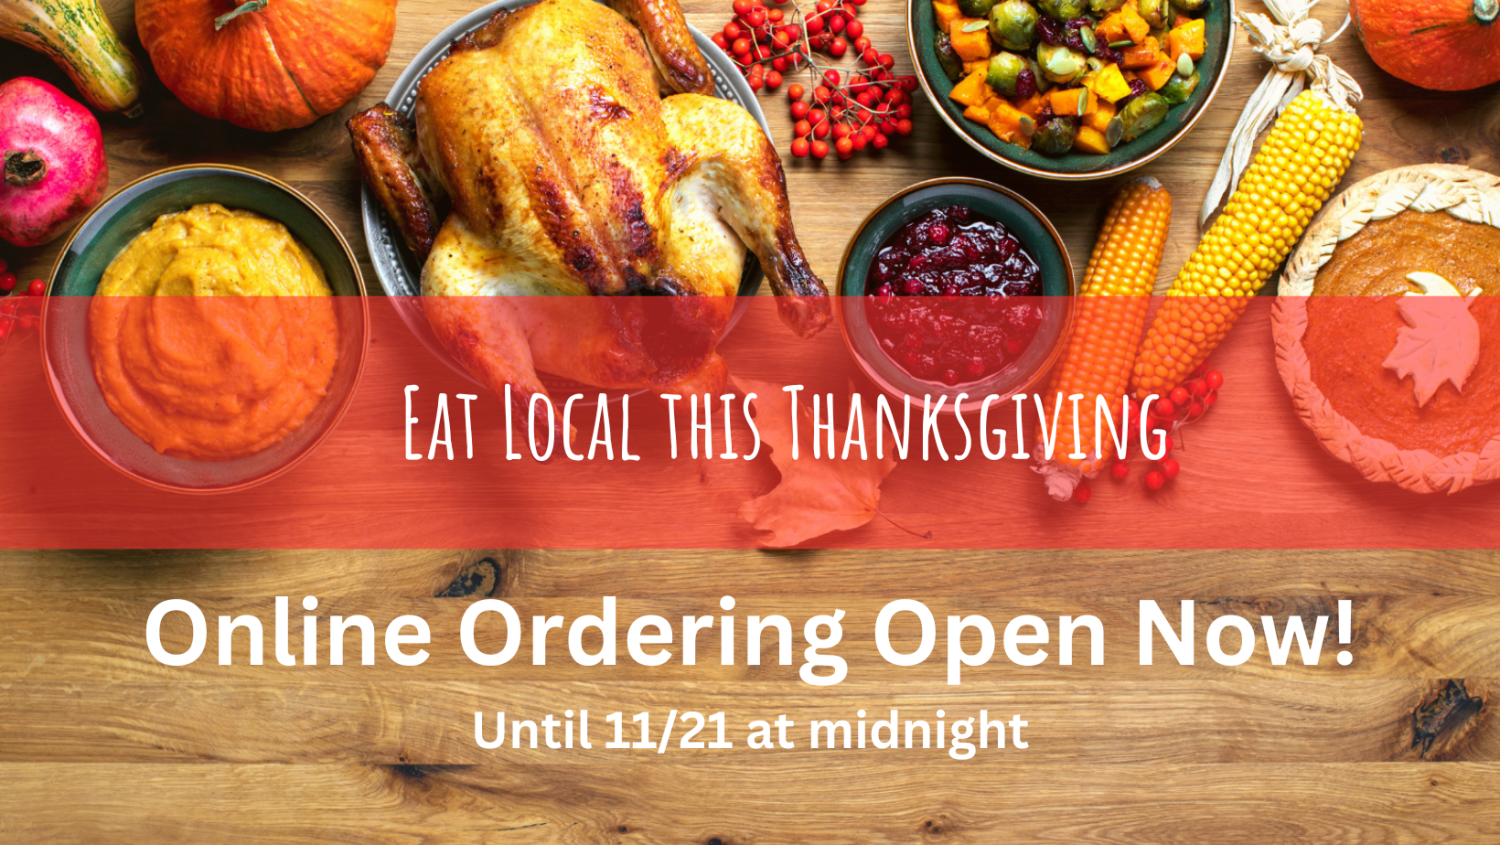 Order from the FarmStand for Thanksgiving!